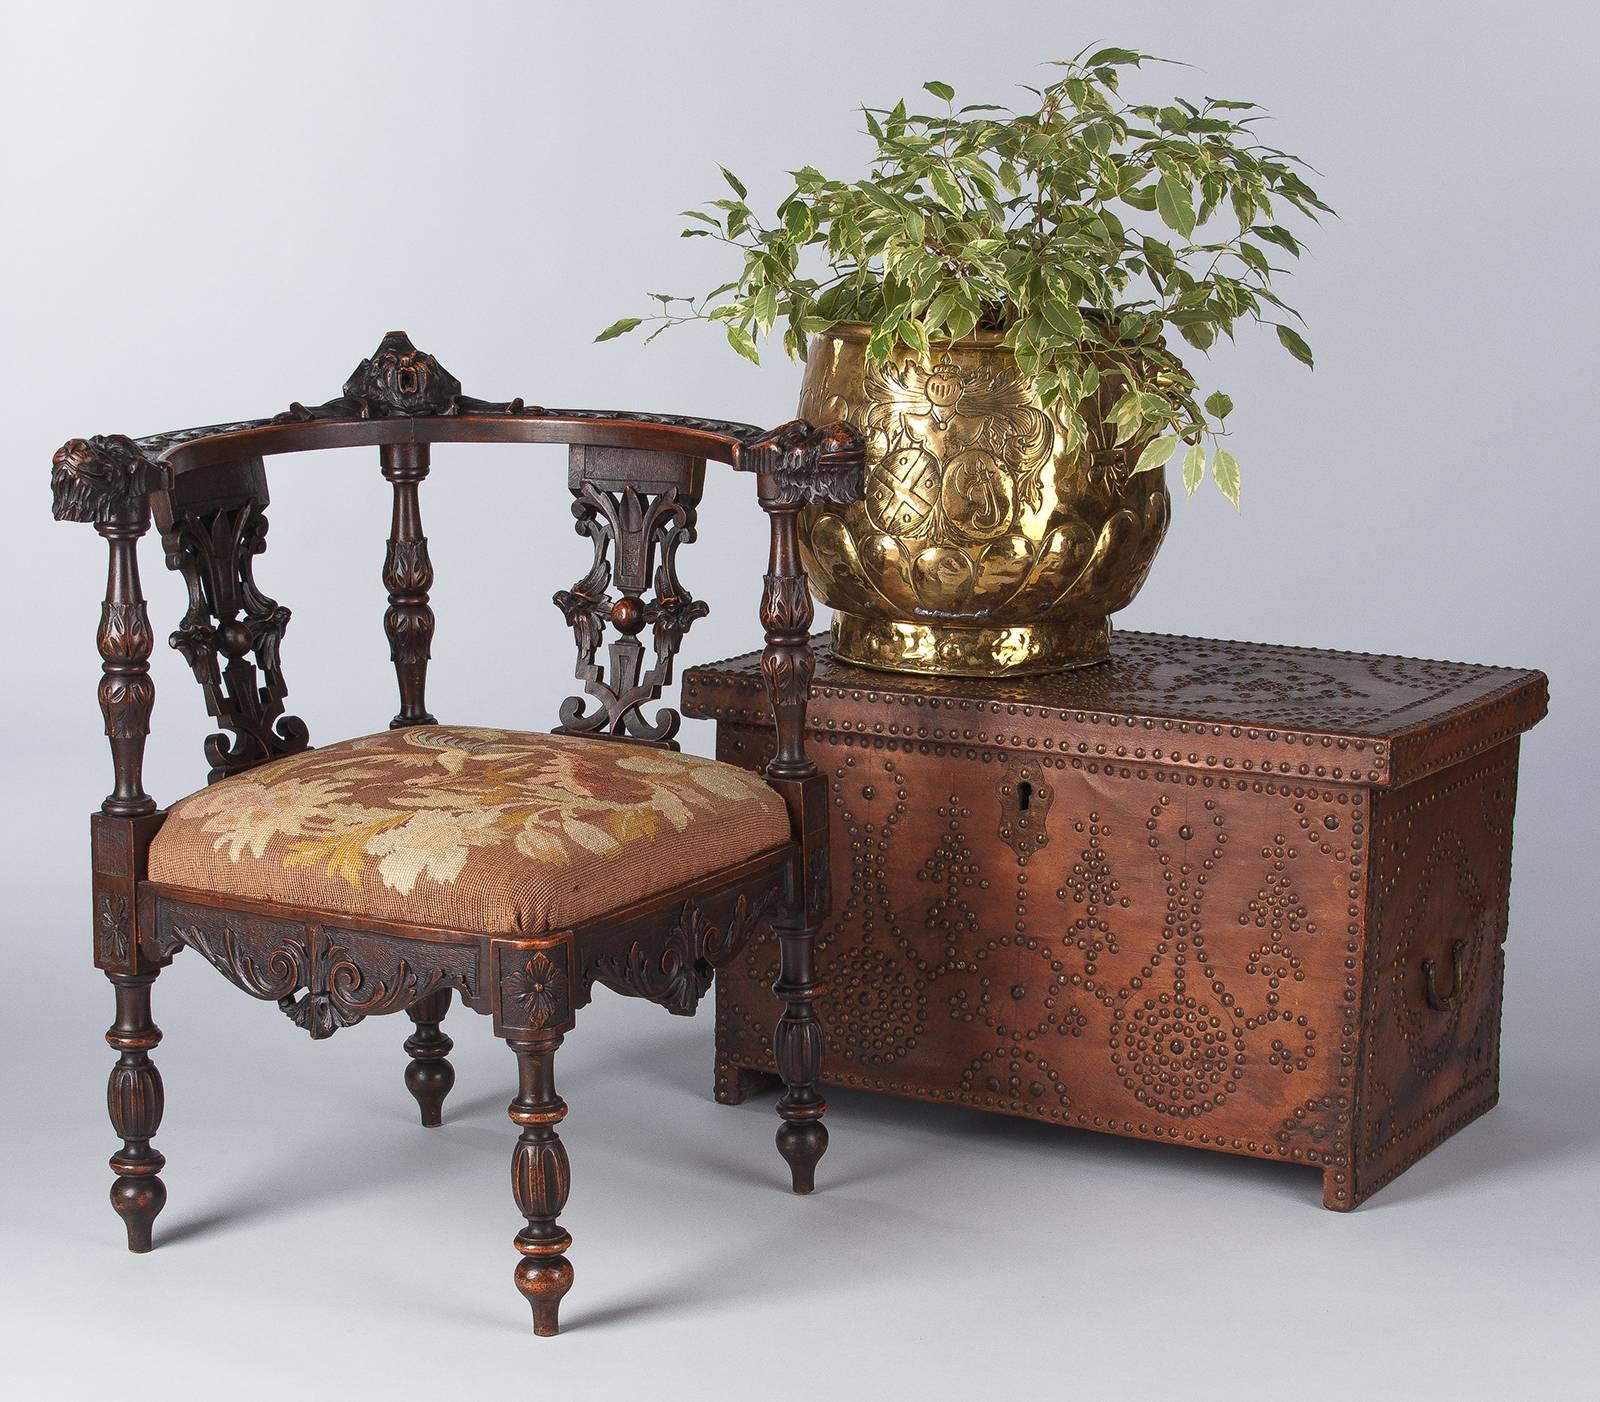 A Renaissance Revival, circa 1880s, French corner armchair made of dark walnut with abundant carvings. The rounded back features a mask at its center, fanciful dragons at the end of the armrests and phoenixes on the back. More carvings of acanthus